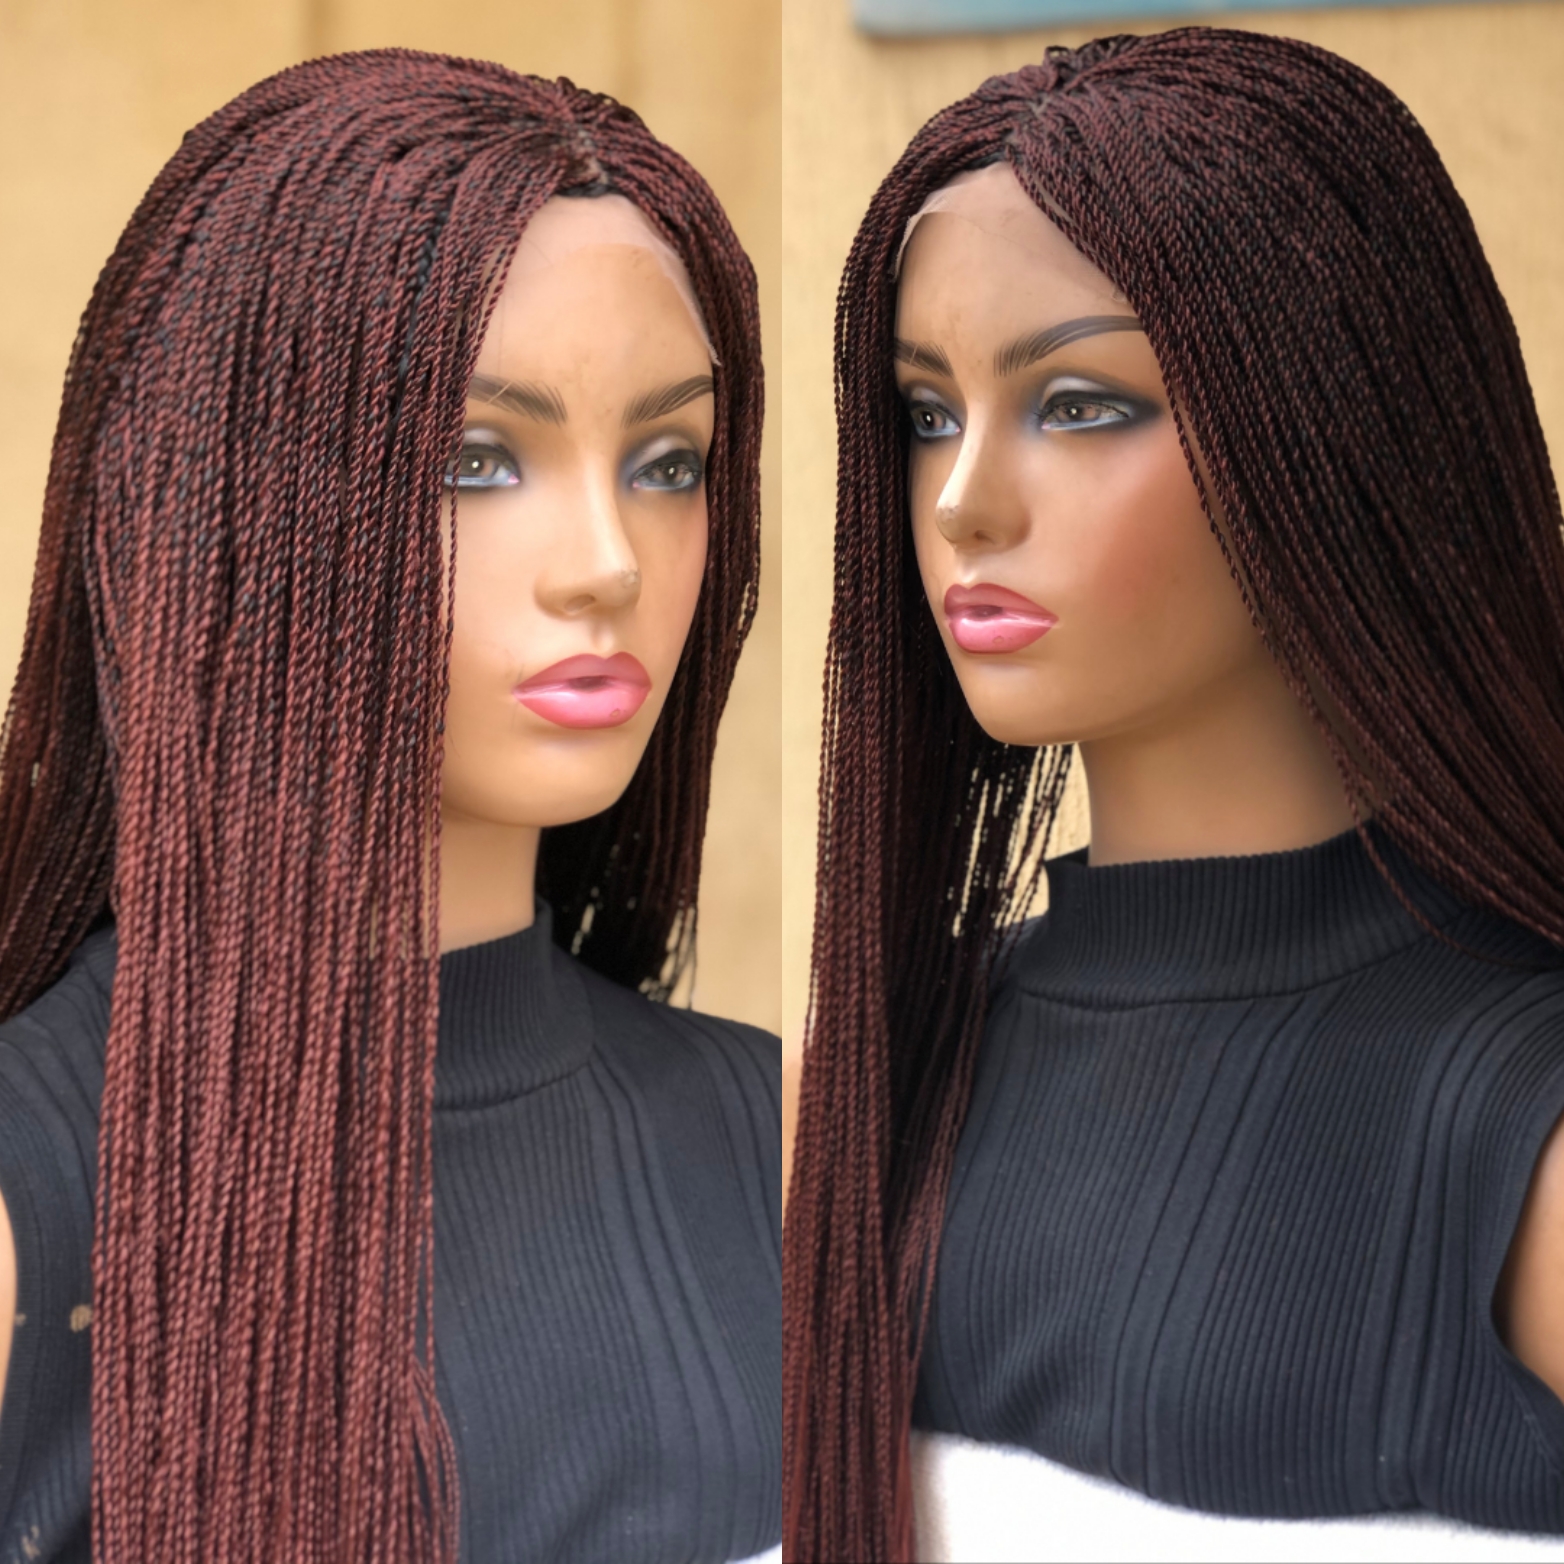 Braided Wig Micro Senegalese Twist 30 inches